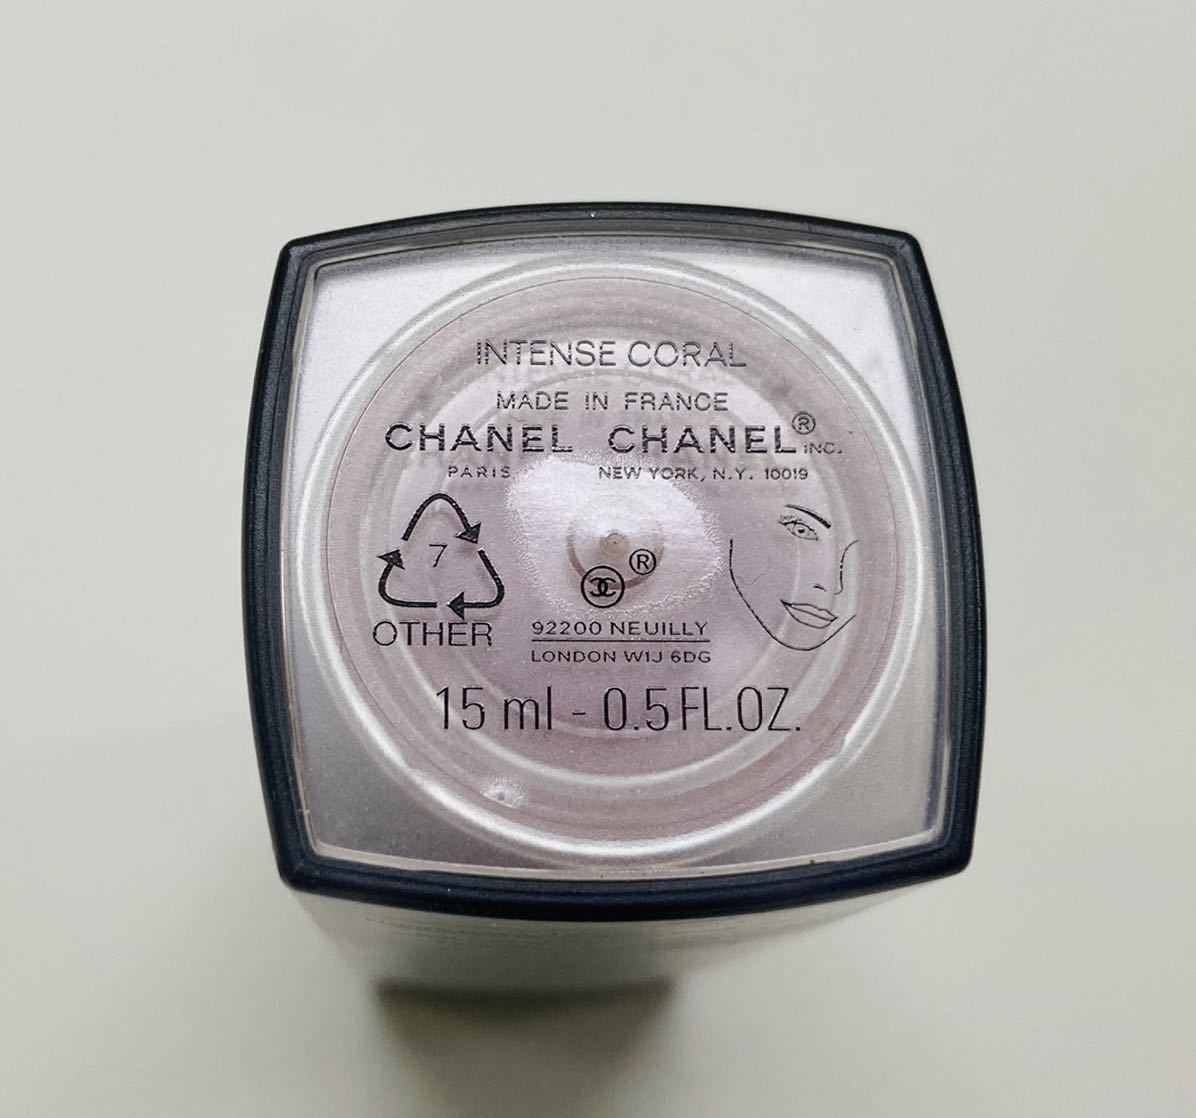  Chanel CHANEL brand cheeks color re beige o-du brush Inte ns coral ..